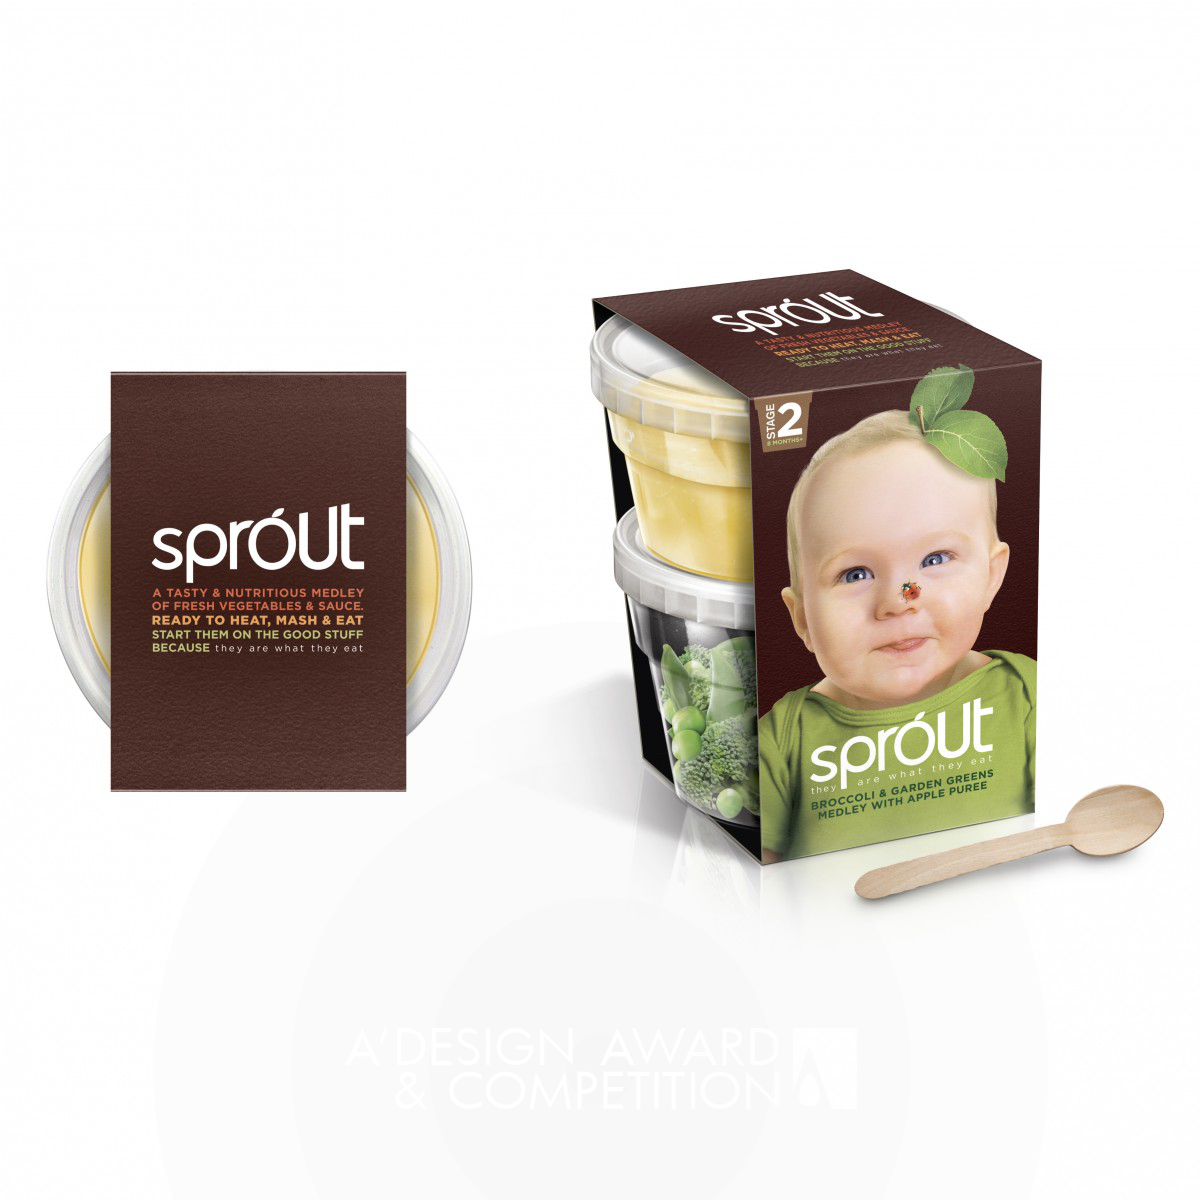 Sprout <b>Baby food brand